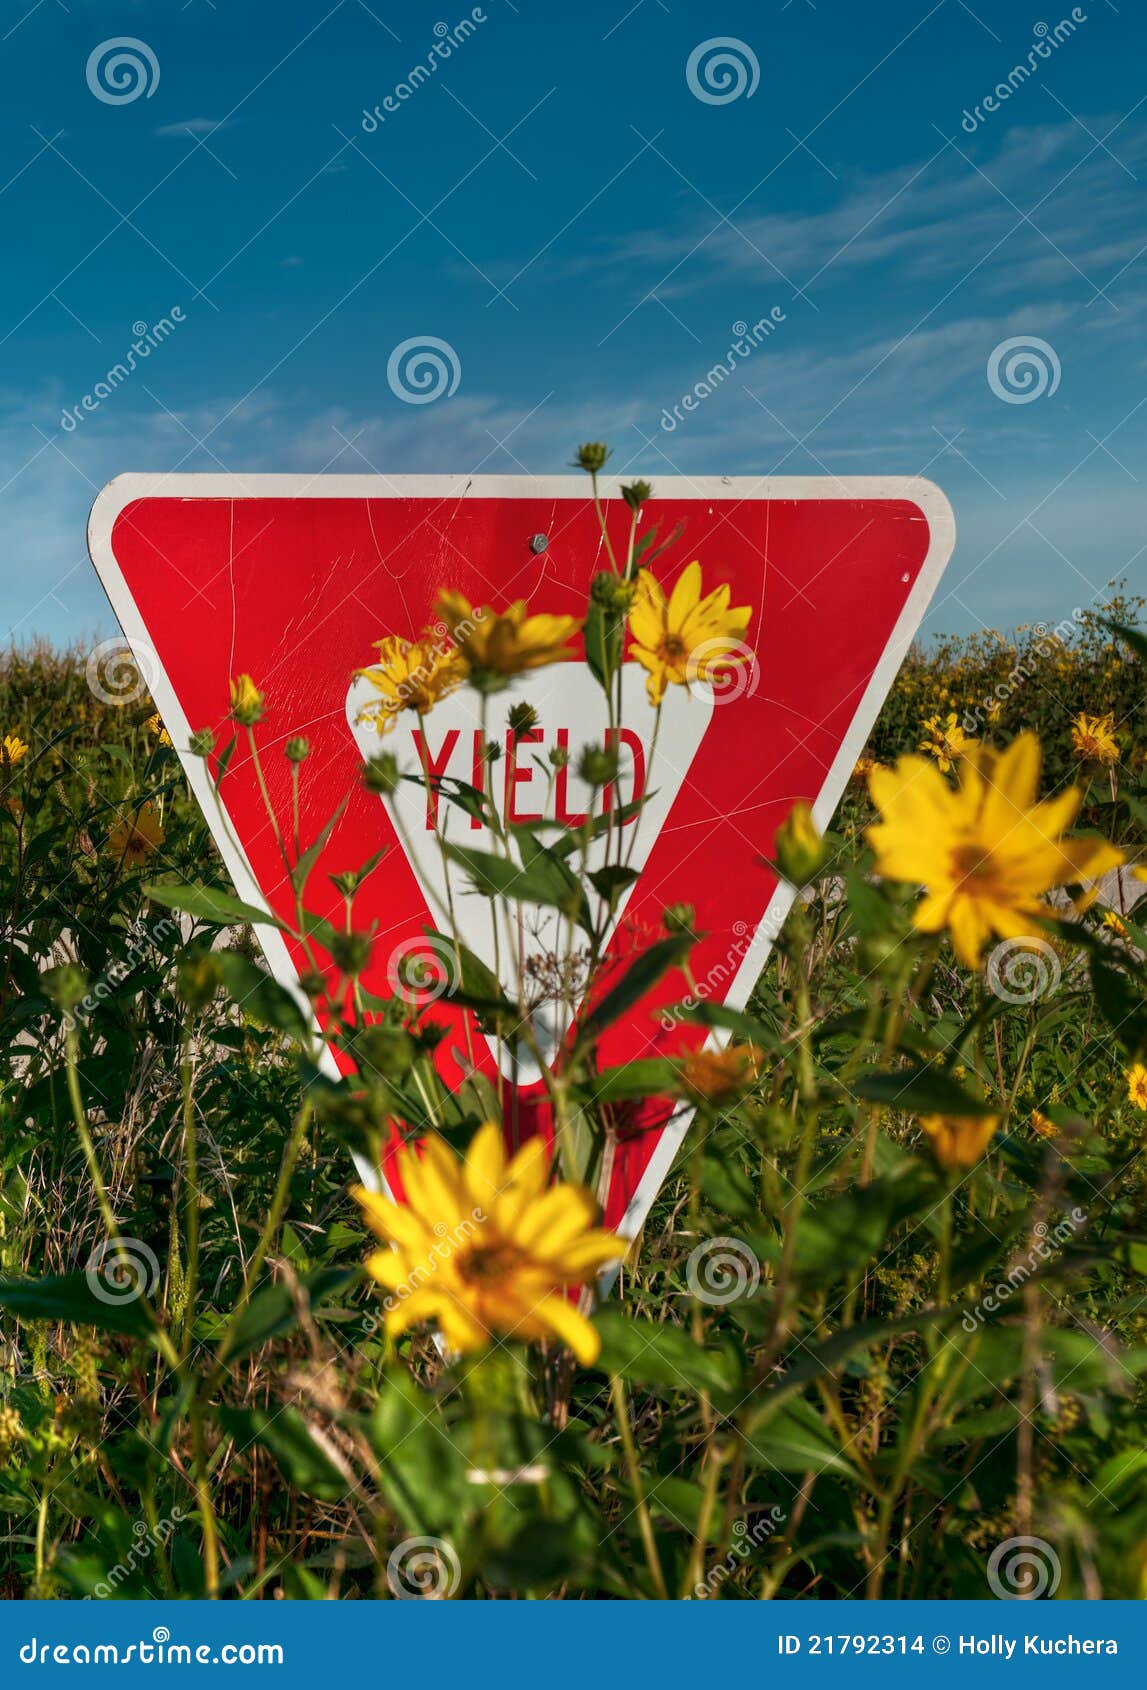 yield sign in flowers